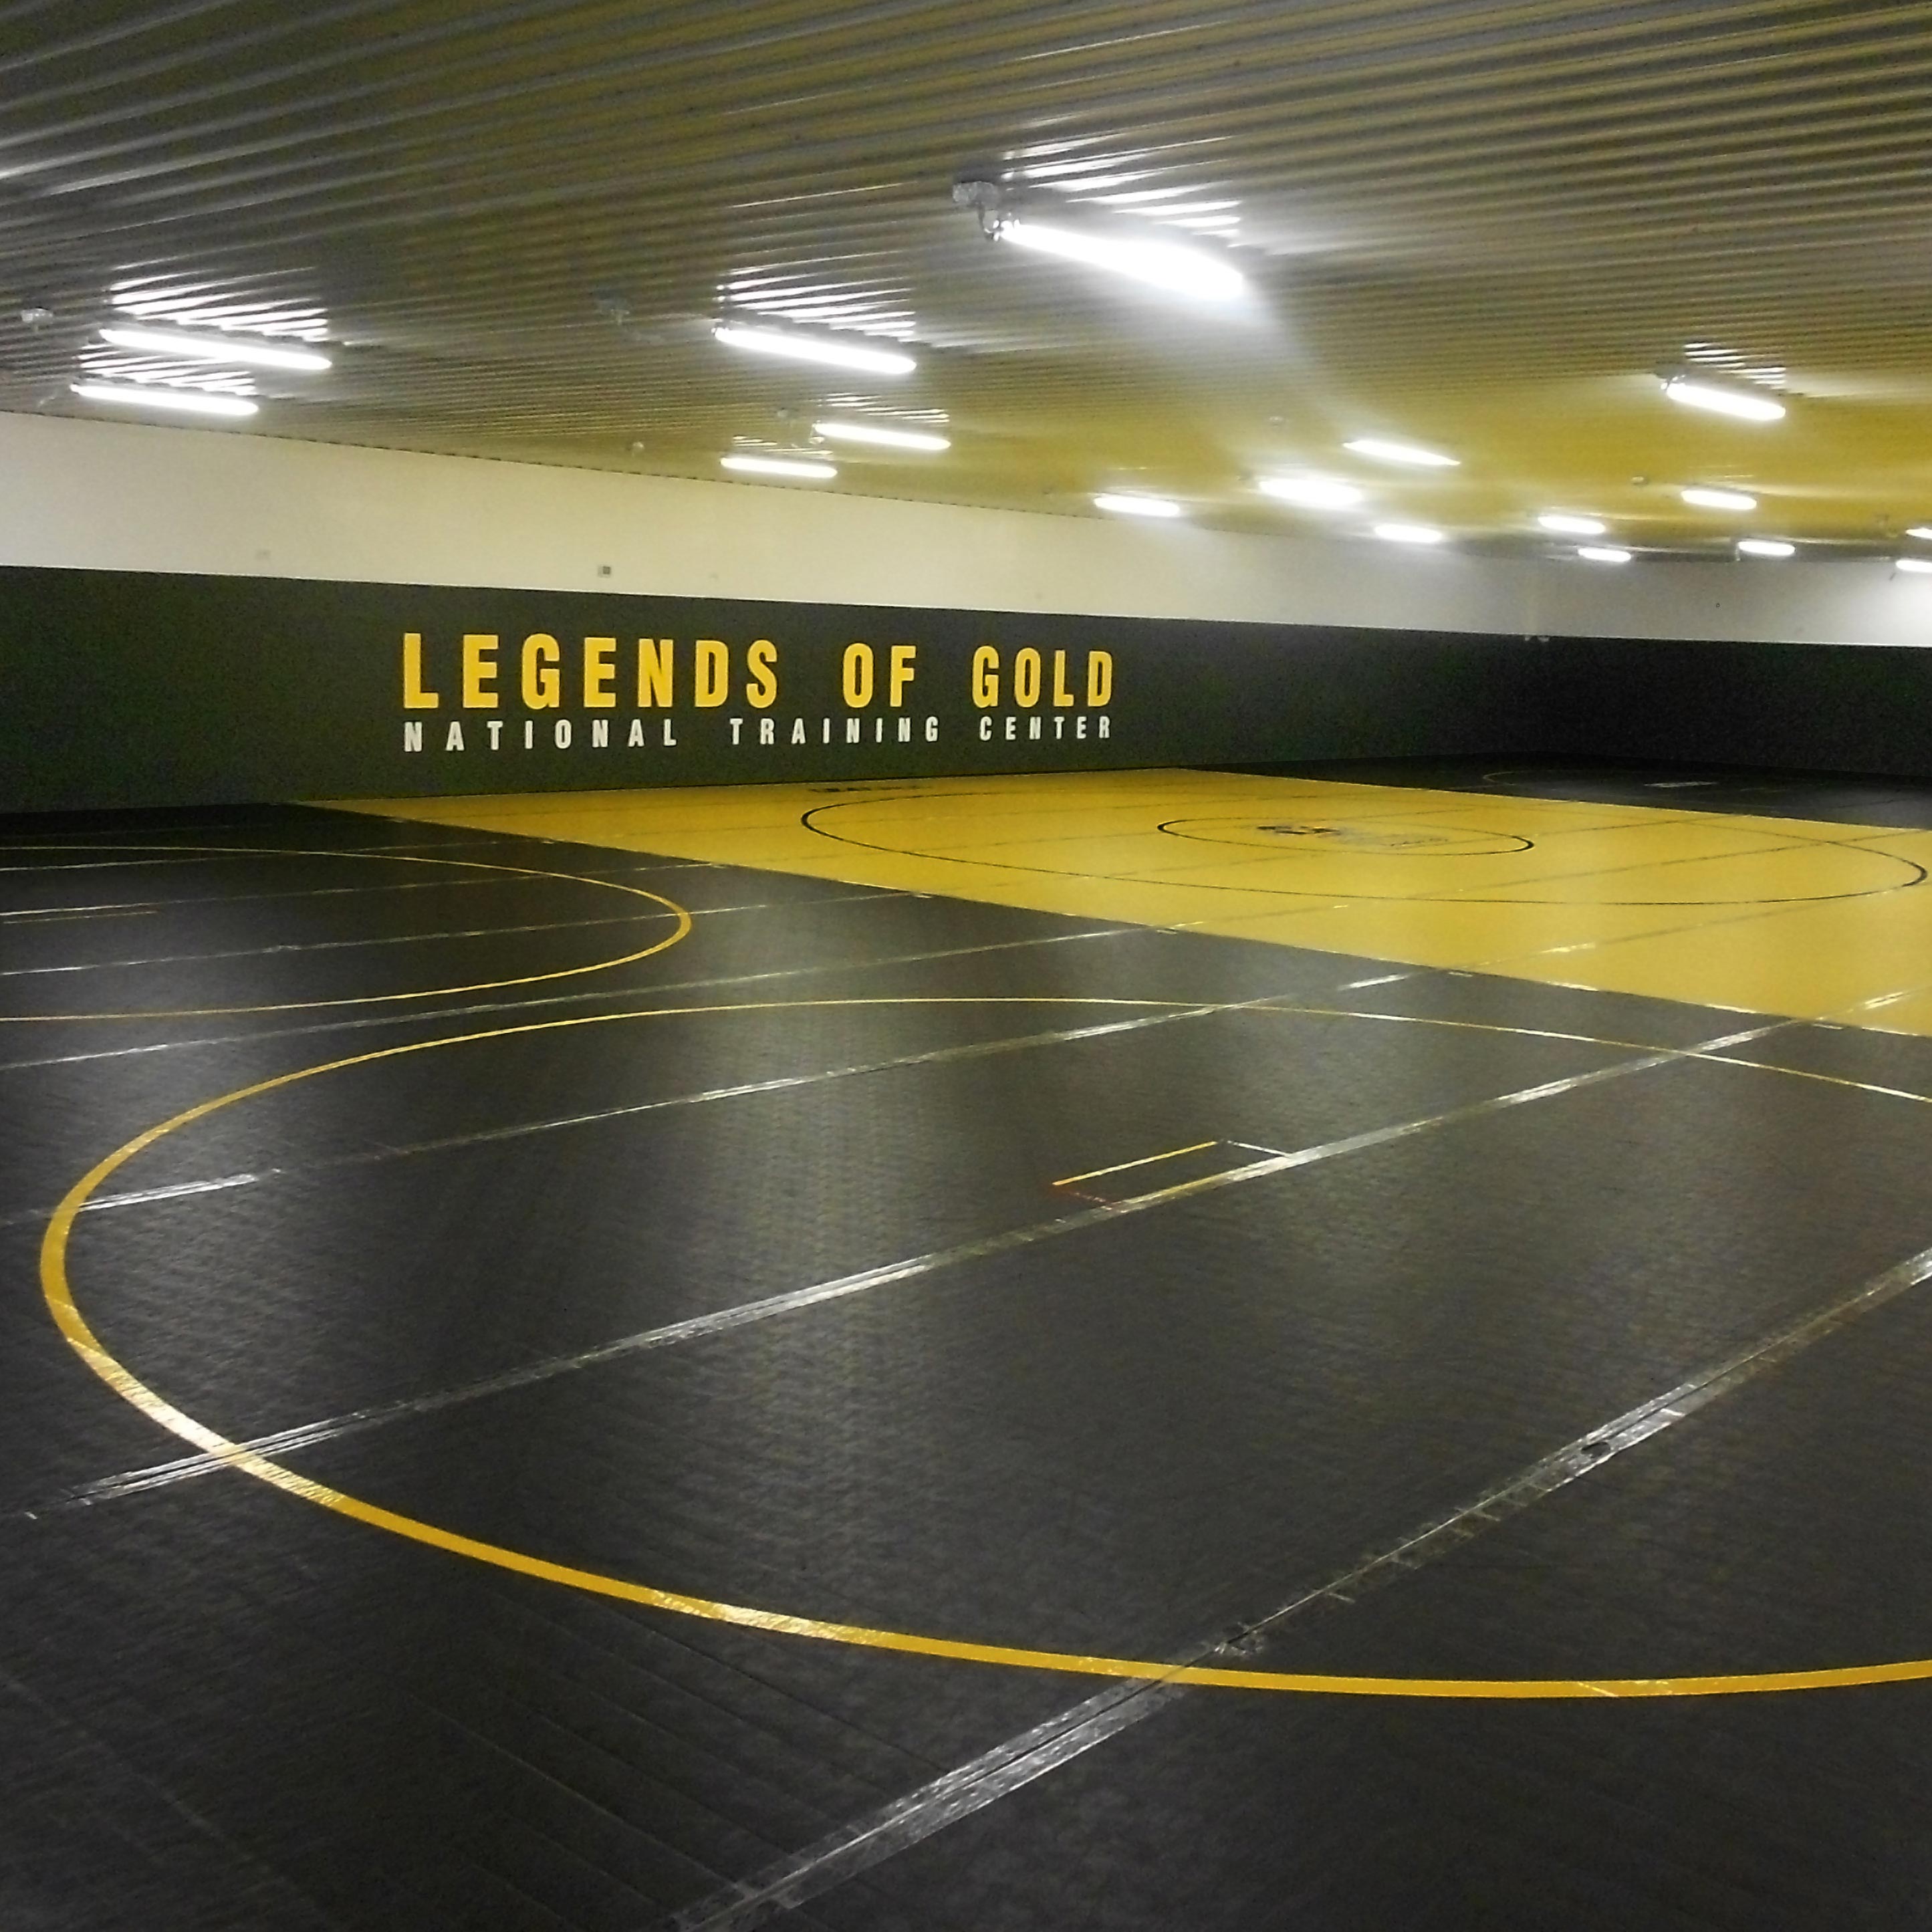 Legends of Gold National Training Center with mats